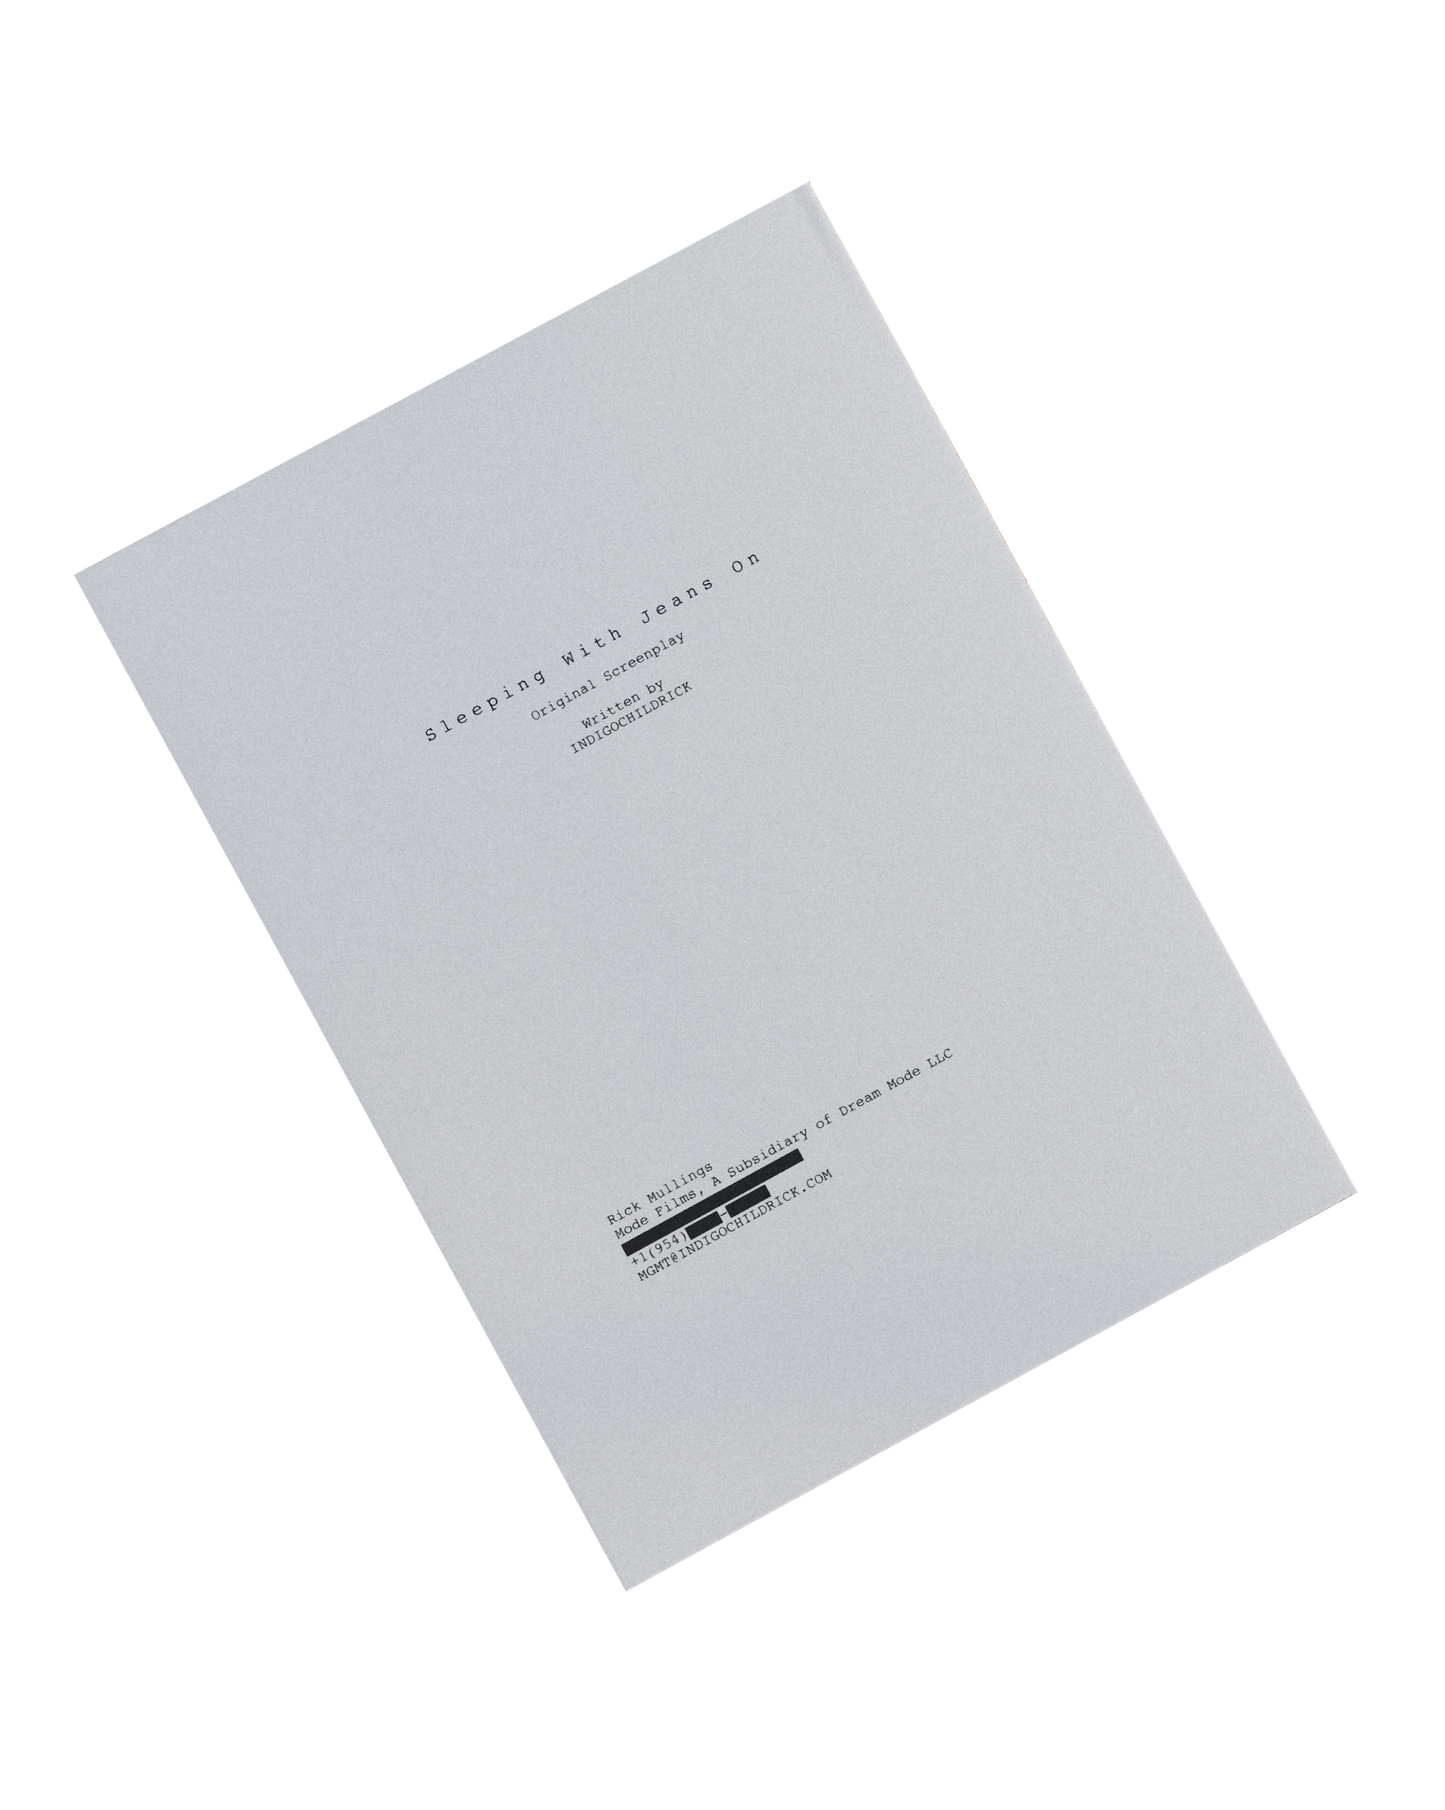 Sleeping With Jeans On - Screenplay [PDF]